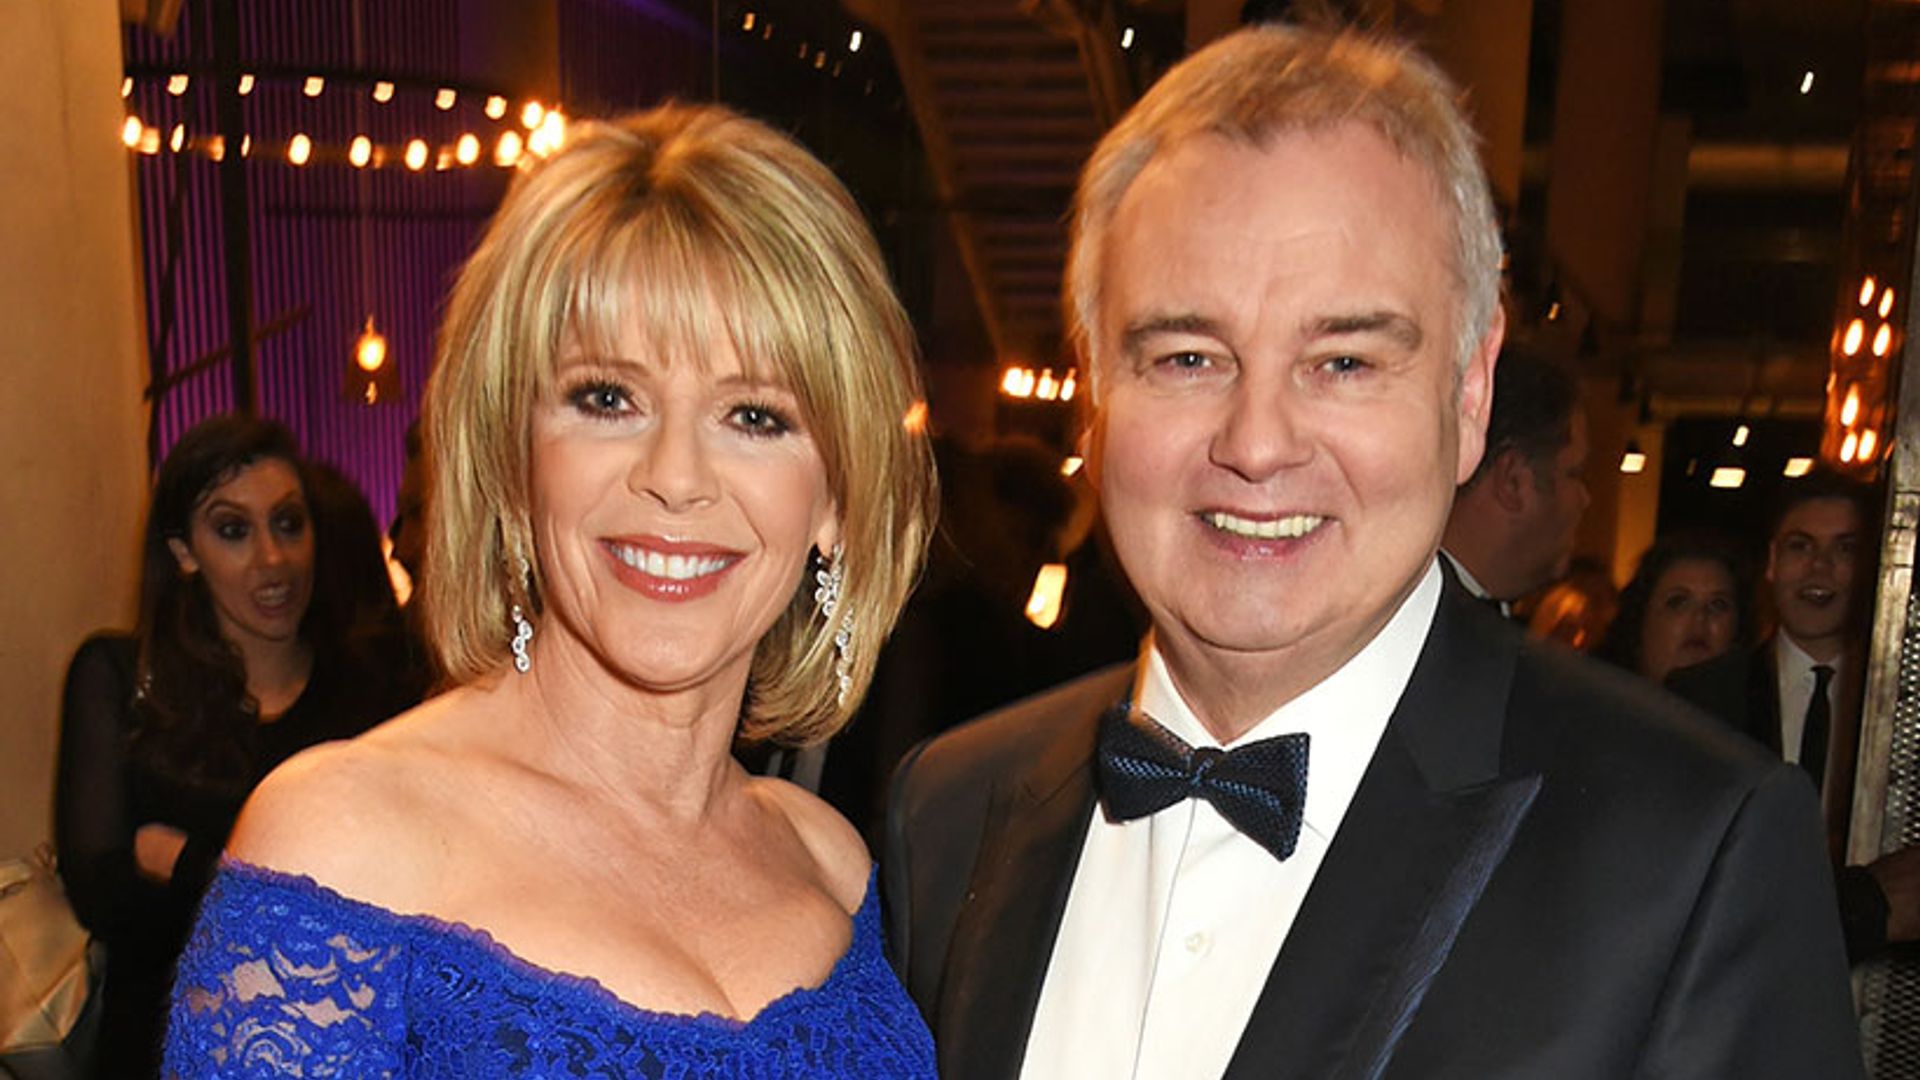 Eamonn Holmes and Ruth Langsford dress in Tudor-inspired costumes - see picture